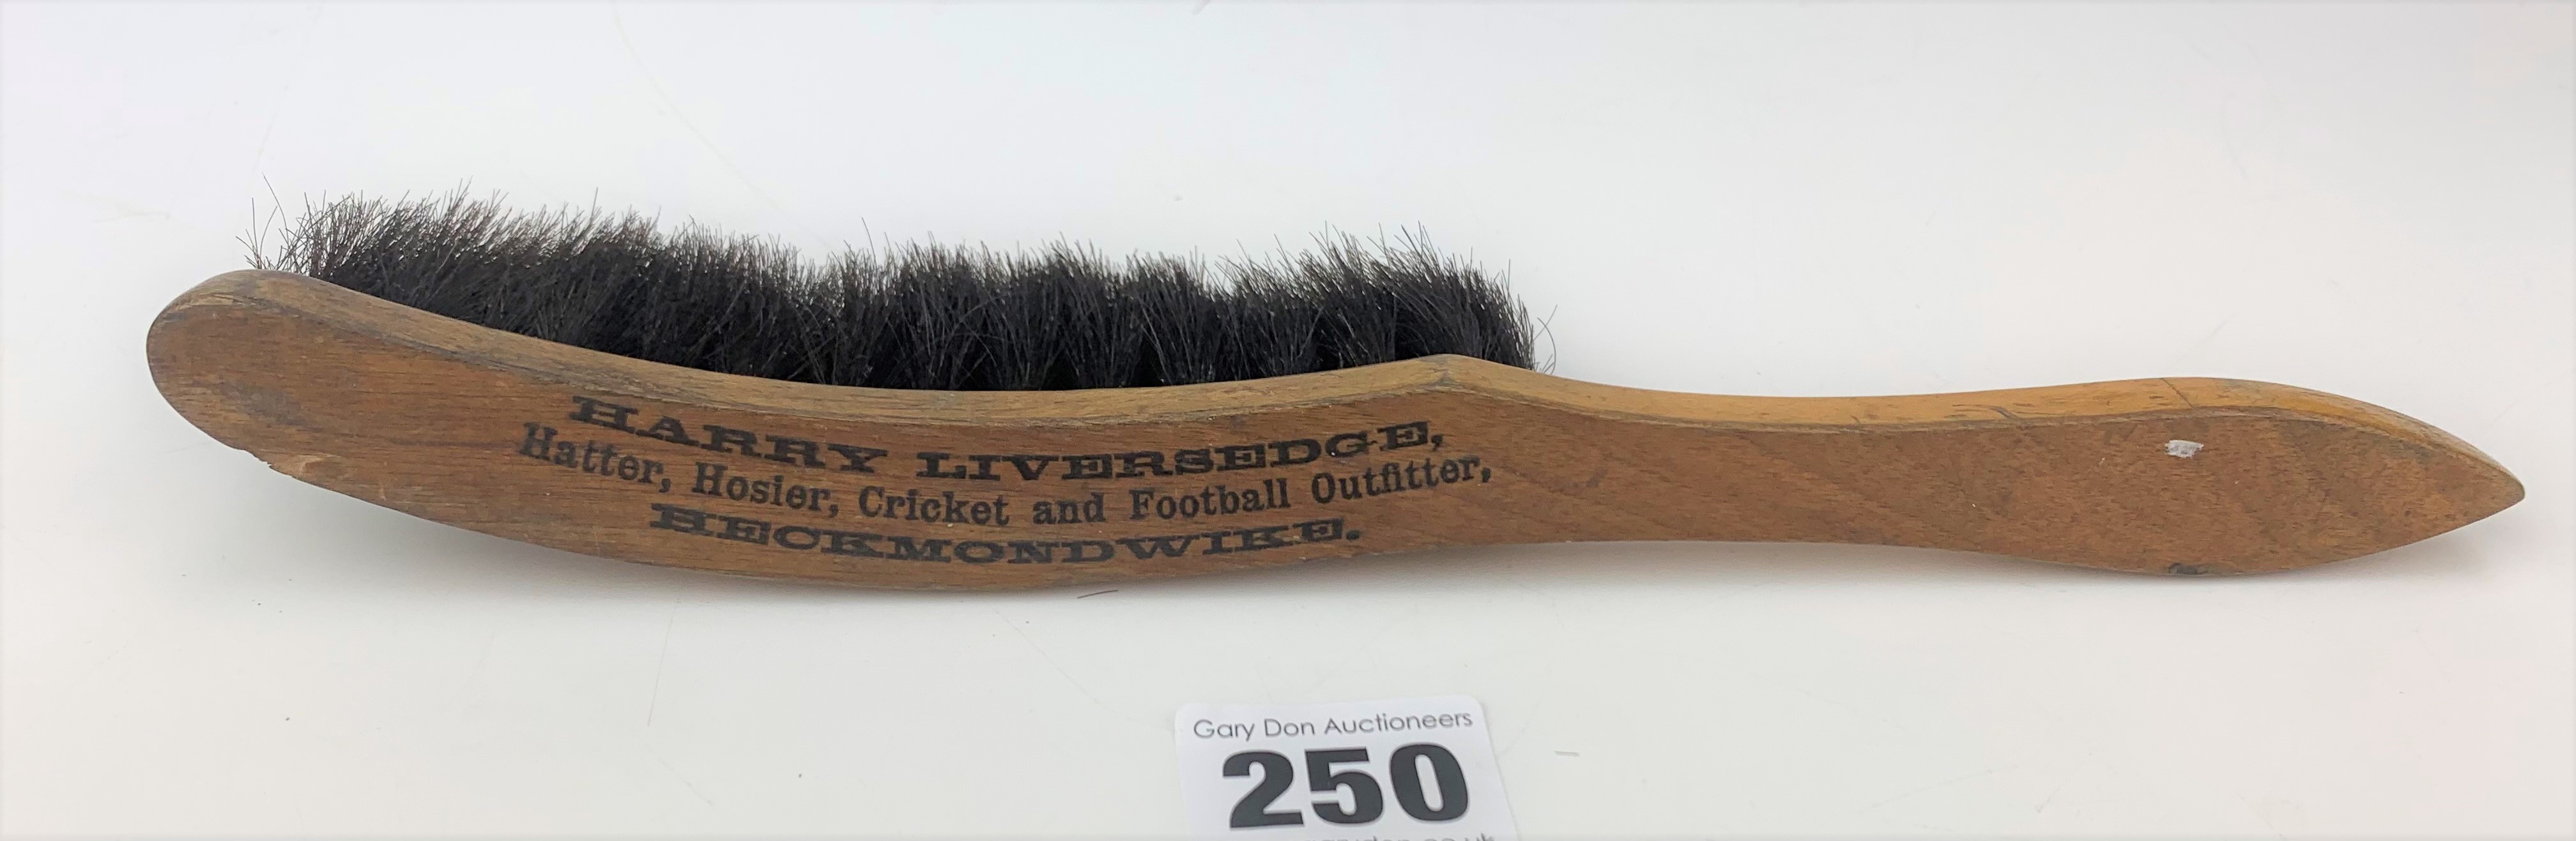 Vintage clothes brush from Harry Liversedge Outfitters, Heckmondwike